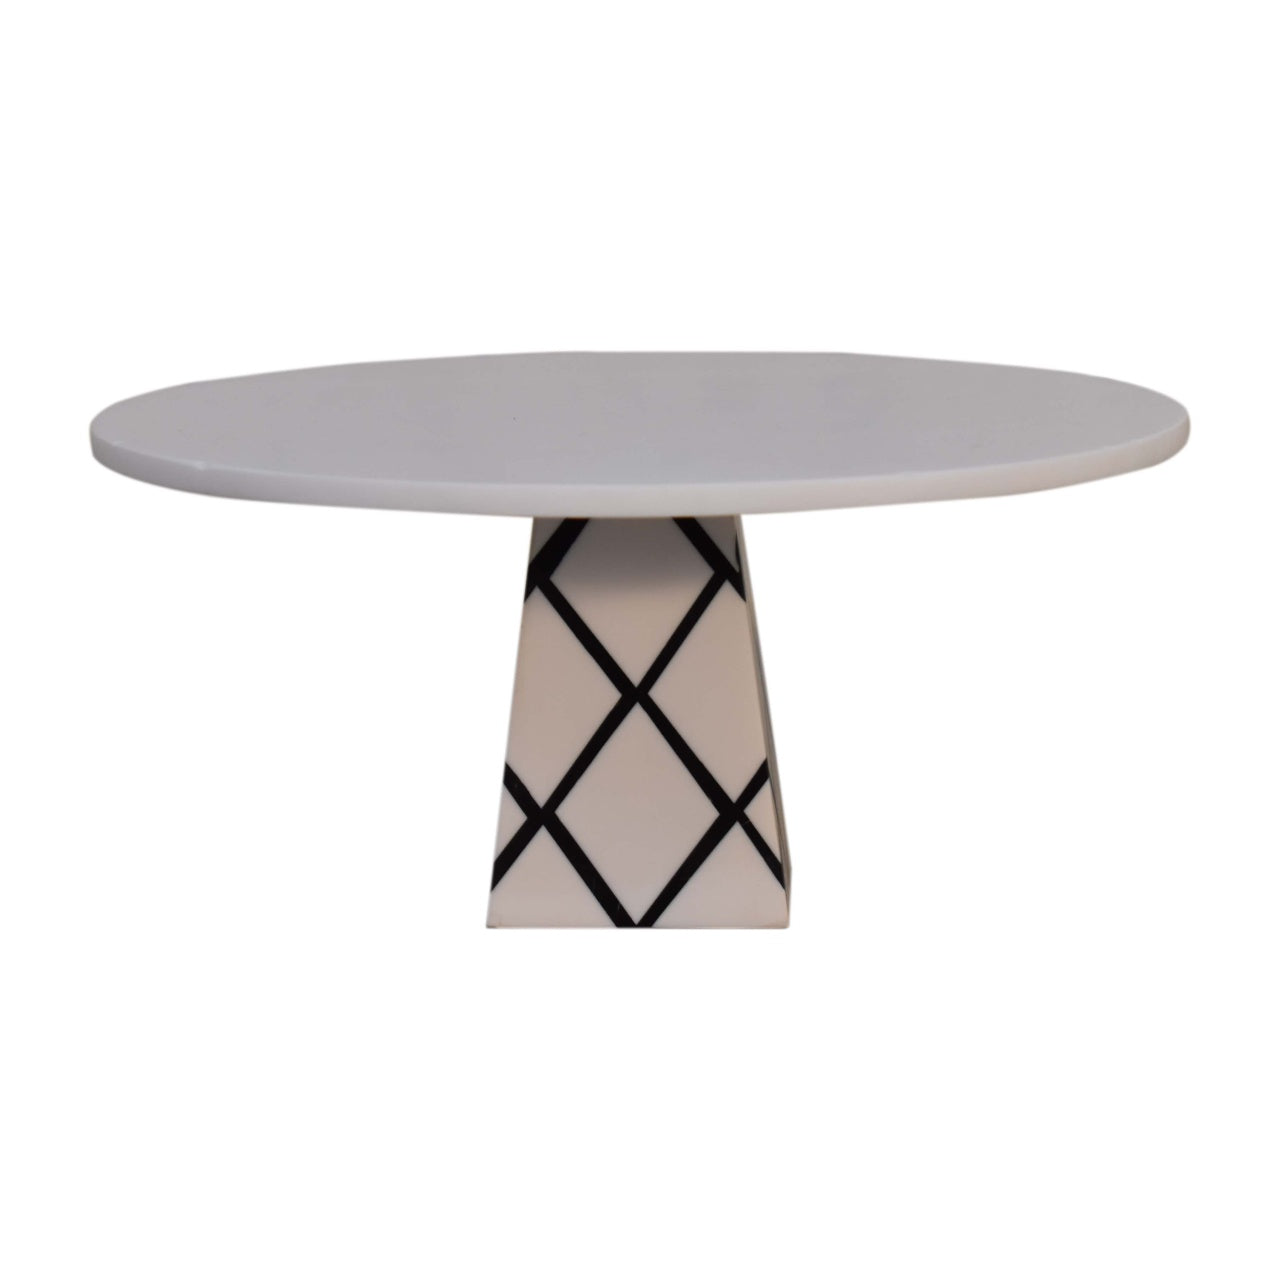 View White Resin Cake Stand information